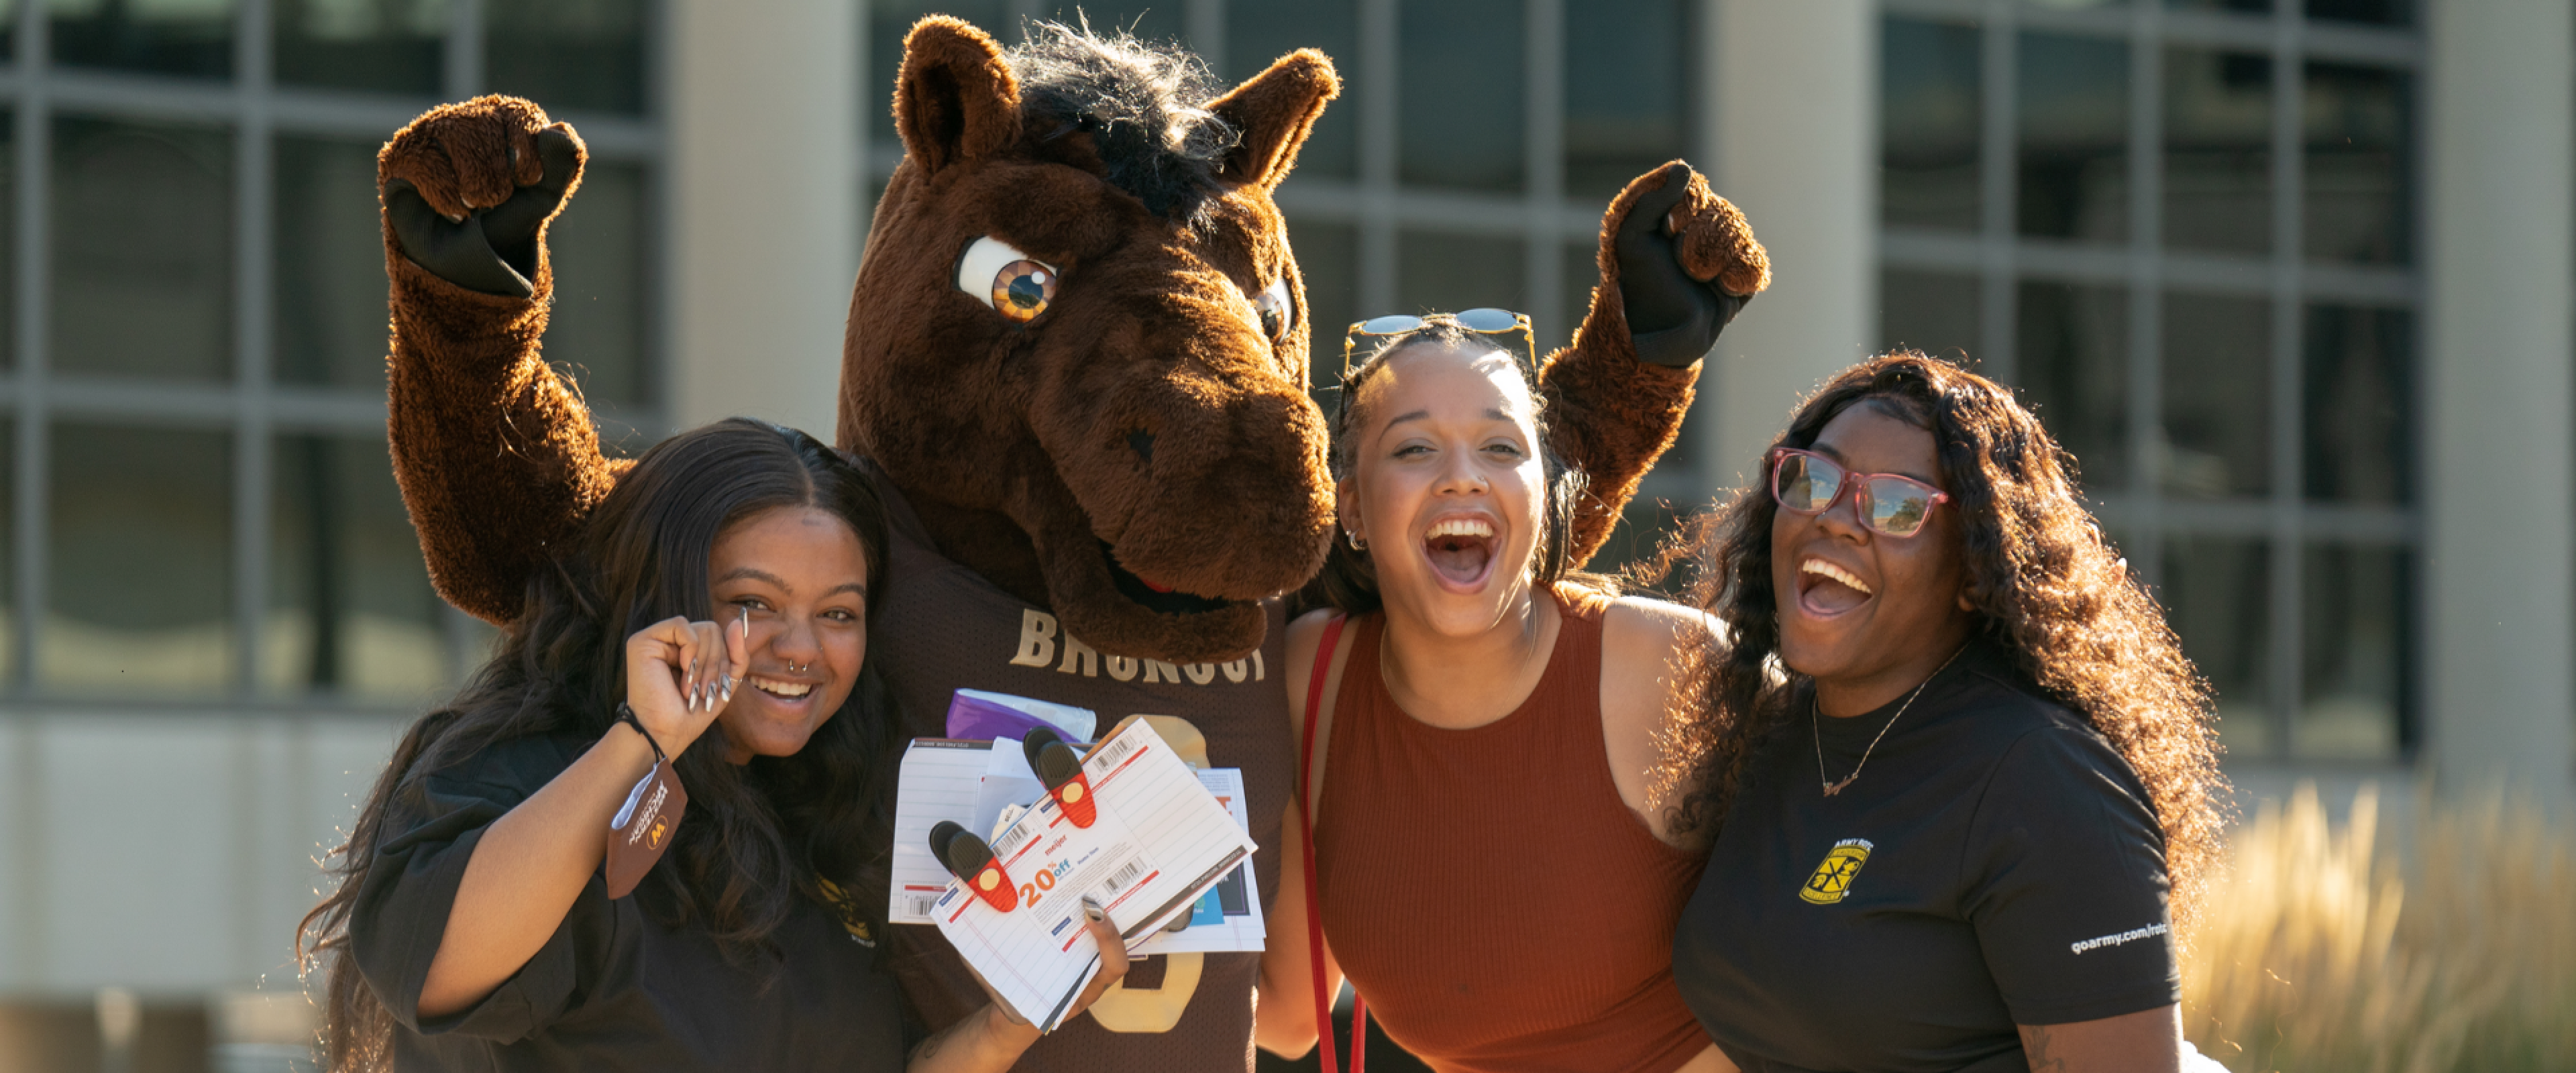 Three smiling students posing with Buster Bronco.